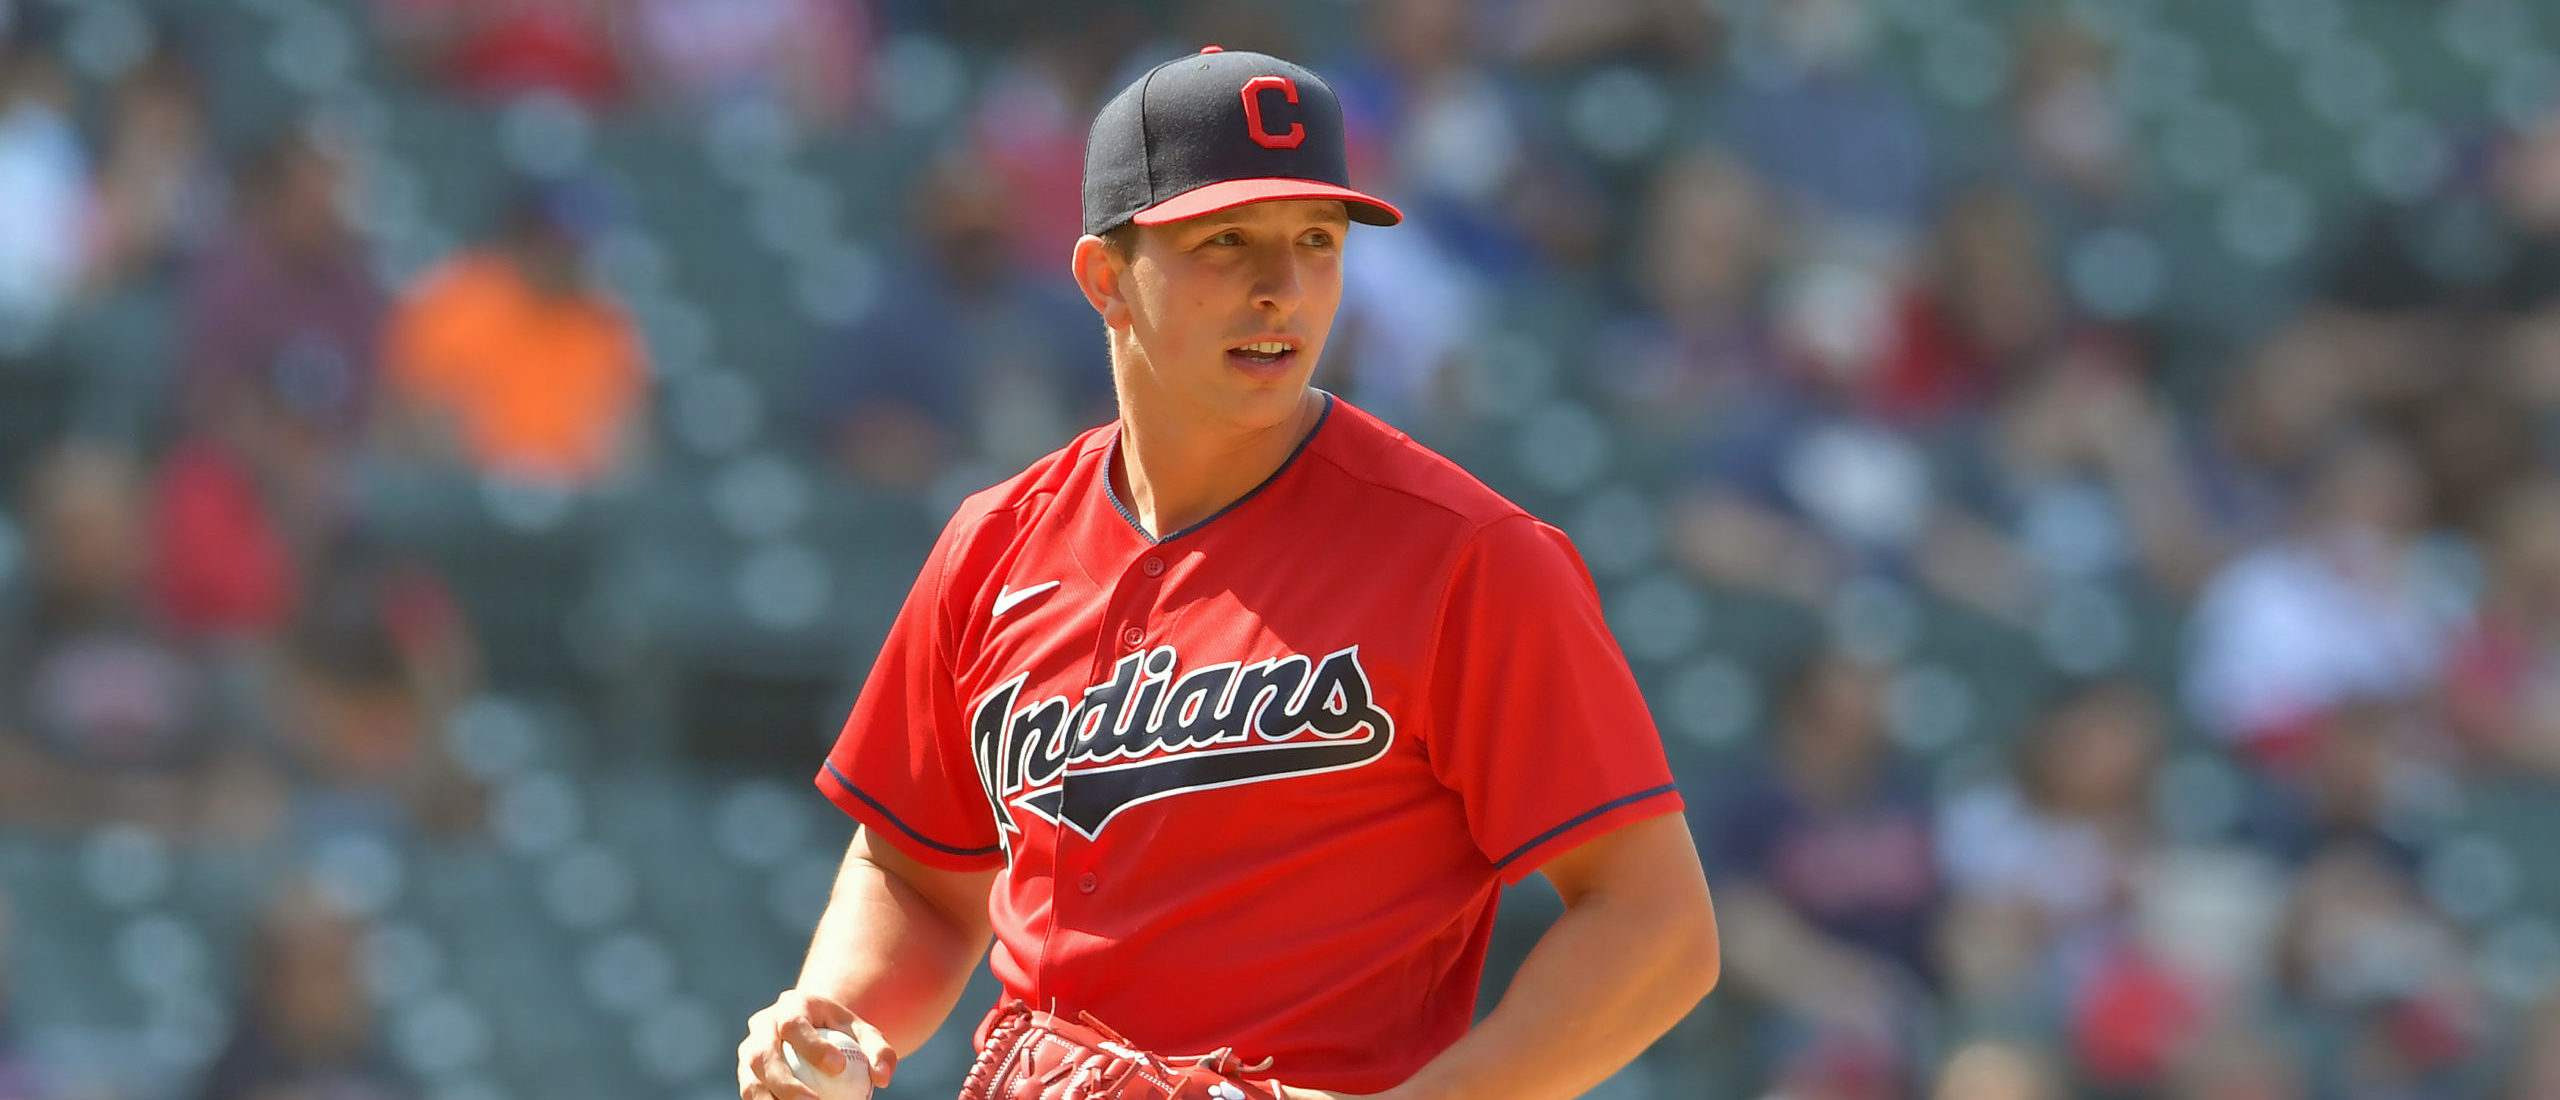 Indians players 'free to make their own choices and decisions' after  pitcher's anti-vaccine post, GM says